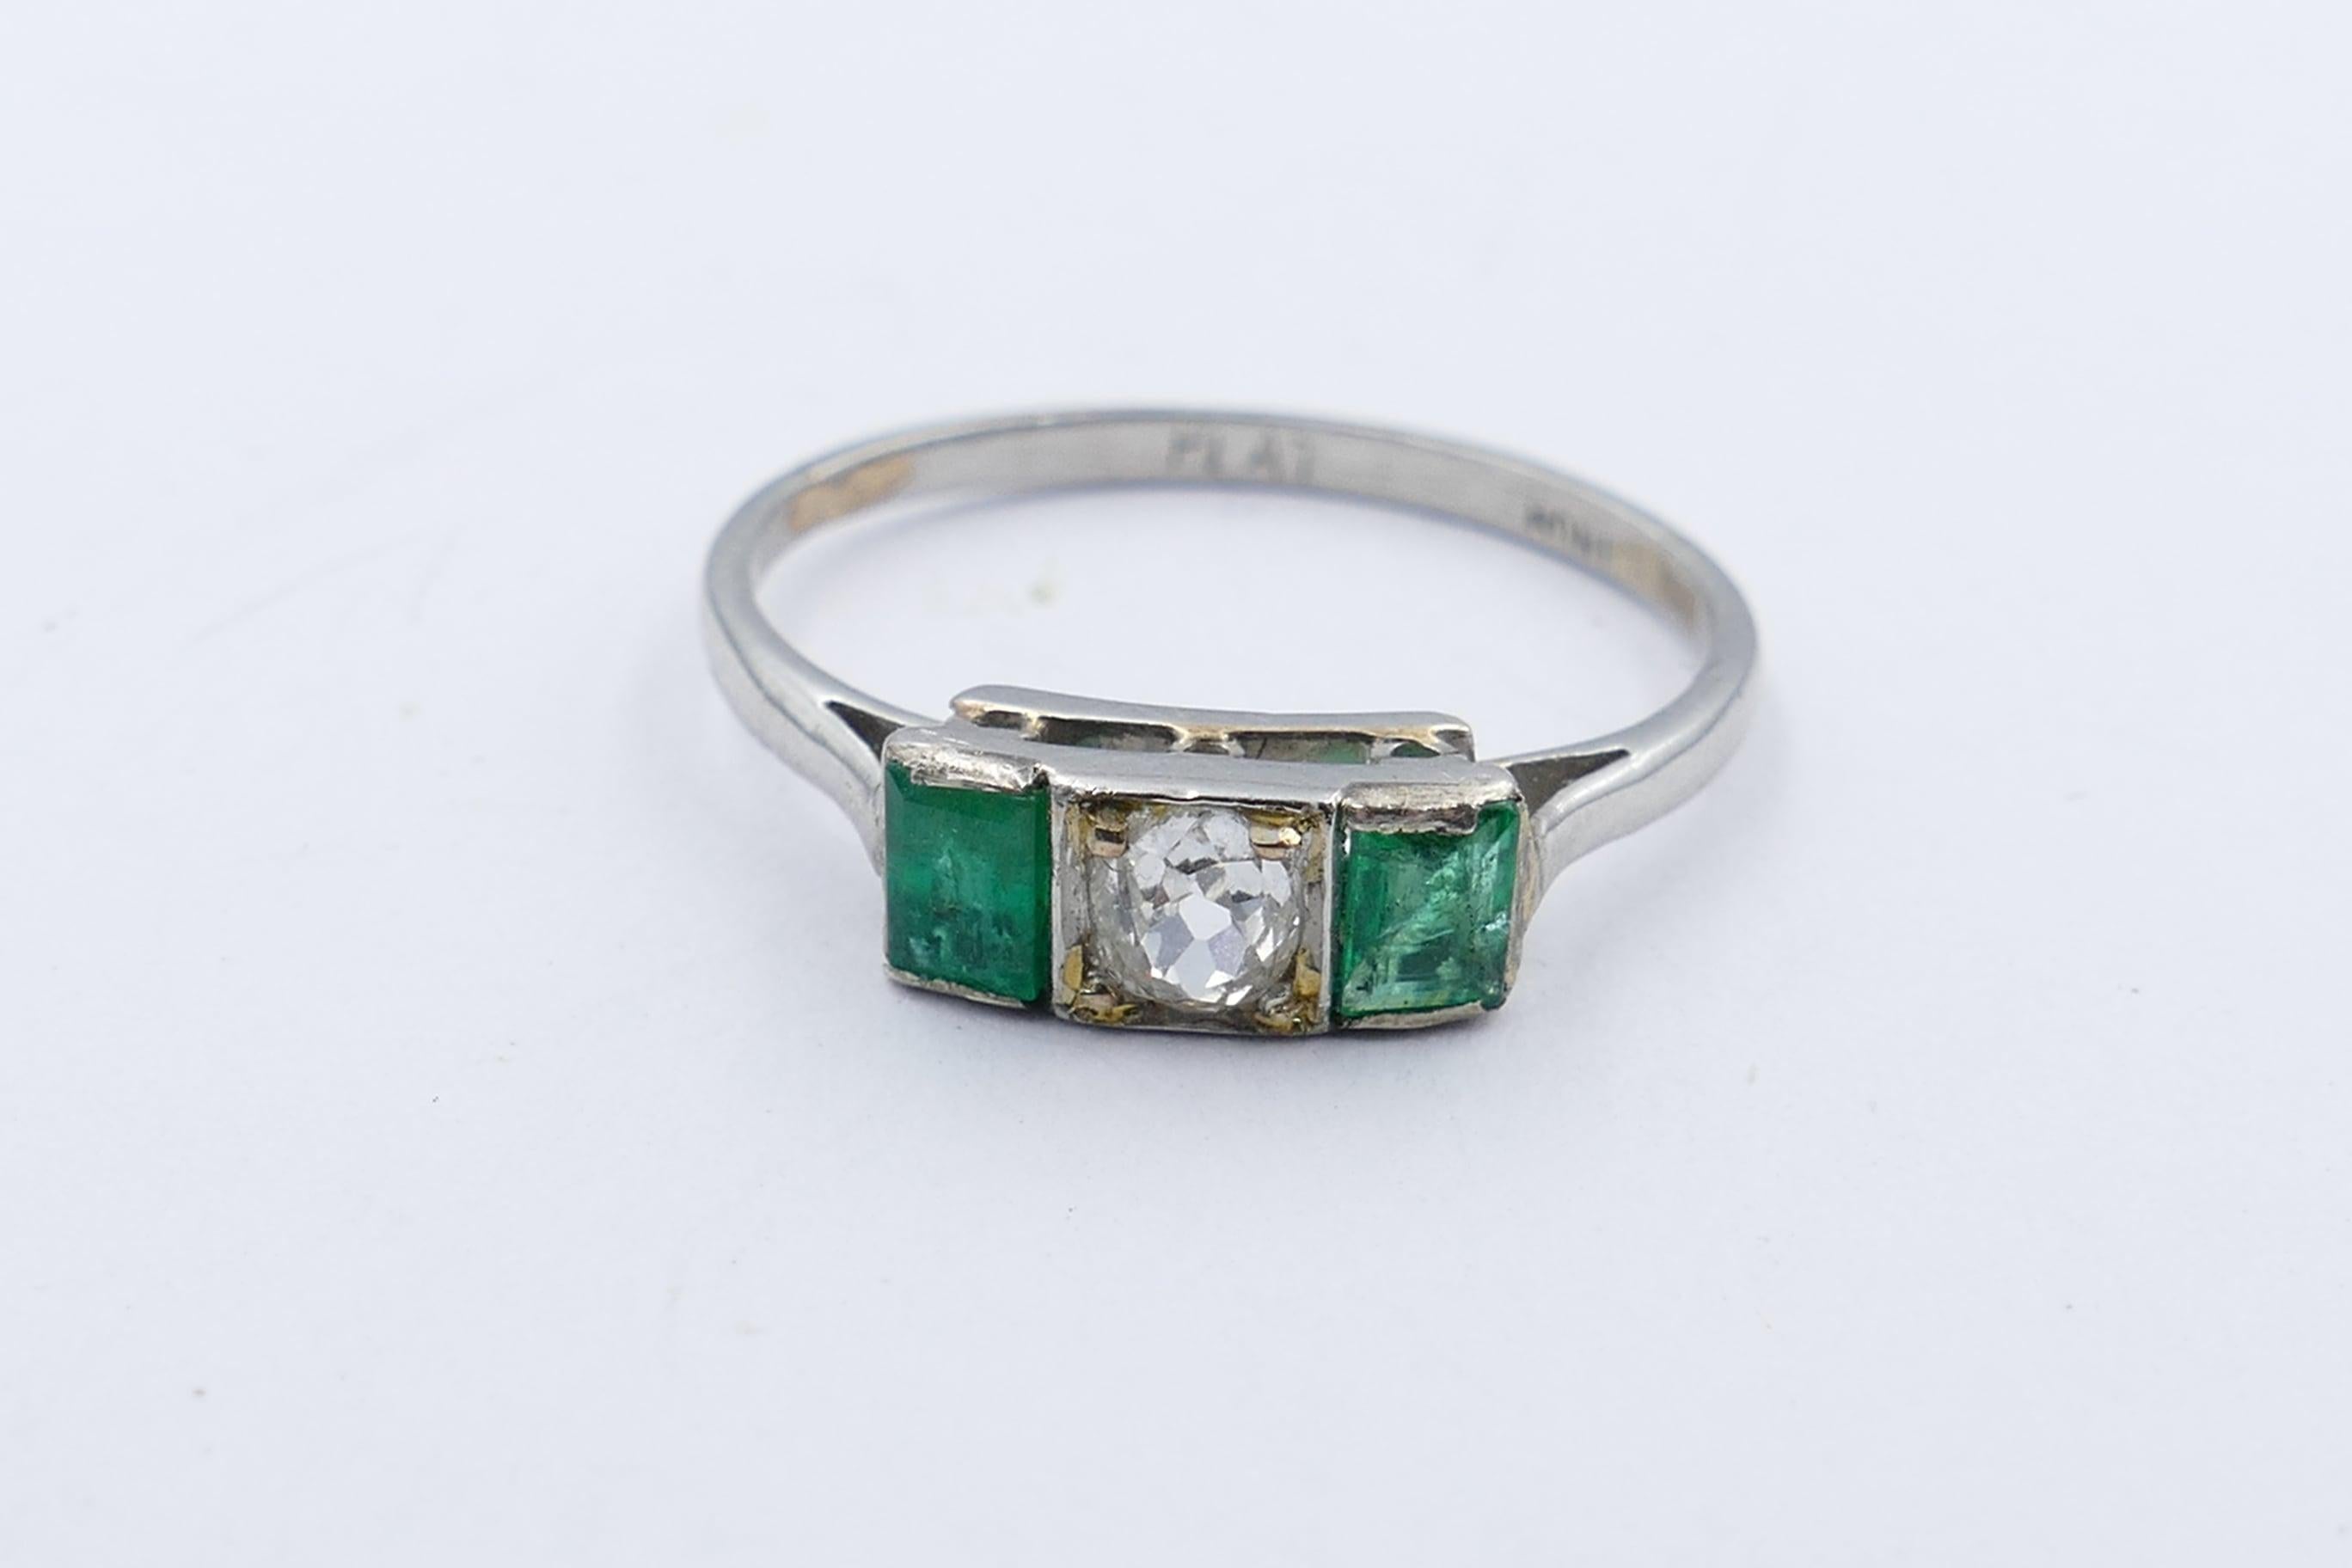 This much sought after Deco Period, Emerald & Diamond Band Ring, features 1 X 0.15 carat Diamond ( although it does look considerably larger), colour H, clarity SI-1, rose cut, & 4 claw set. It is flanked by 2 bluish-green Emeralds, rectangular step